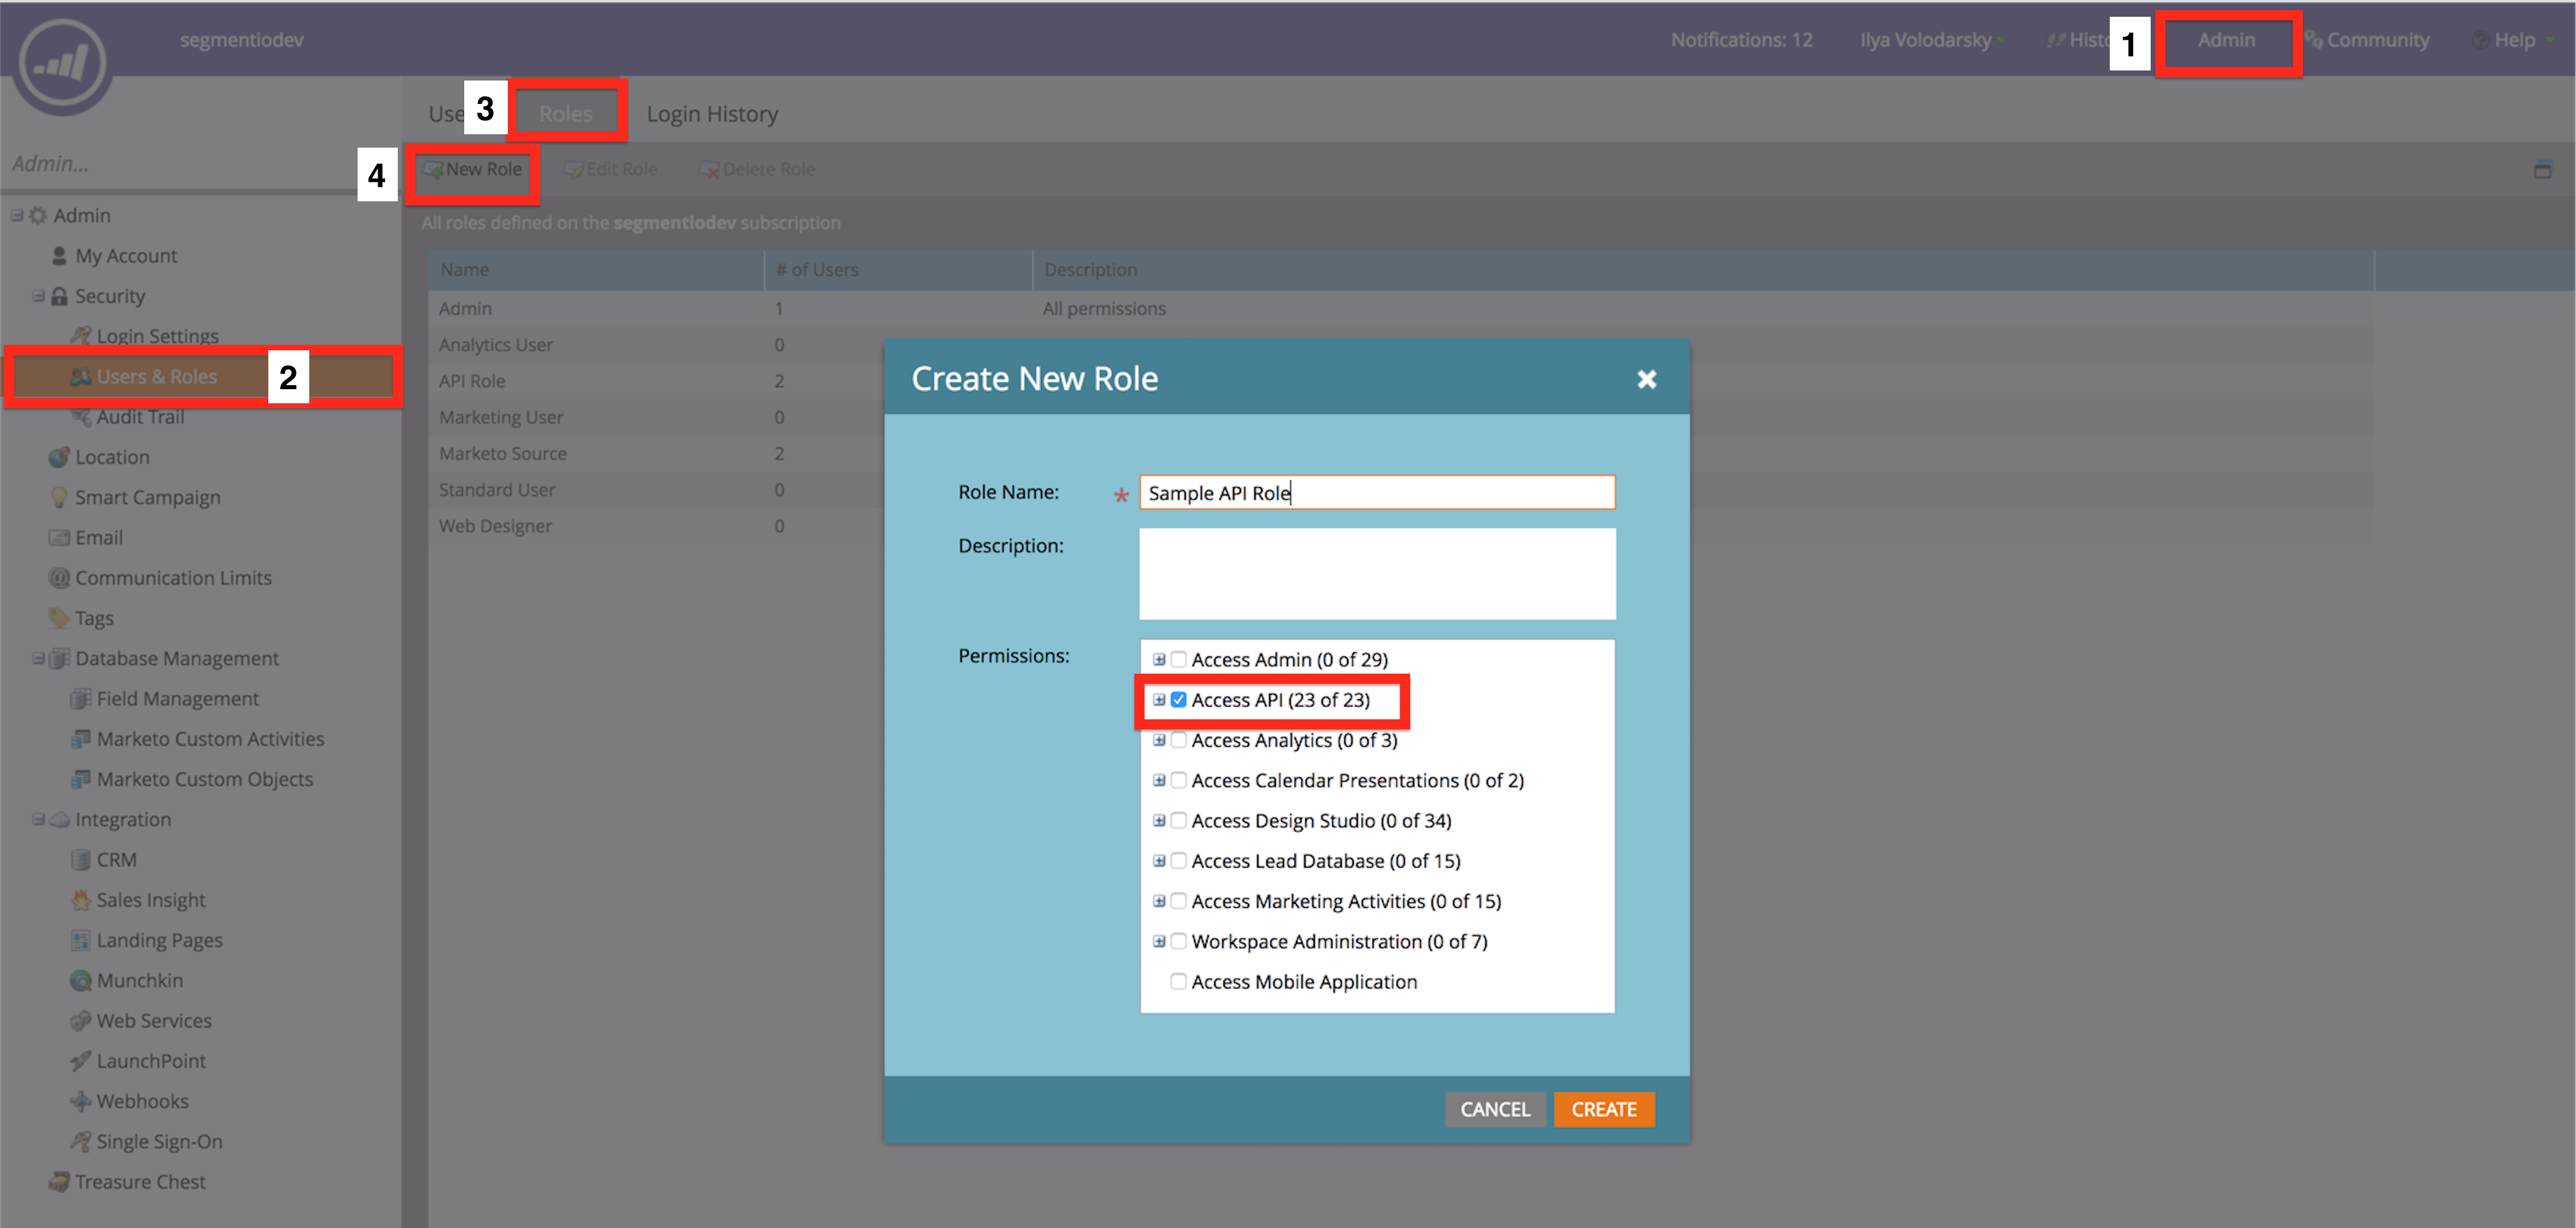 A screenshot of the Create New Role popup in Marketo.